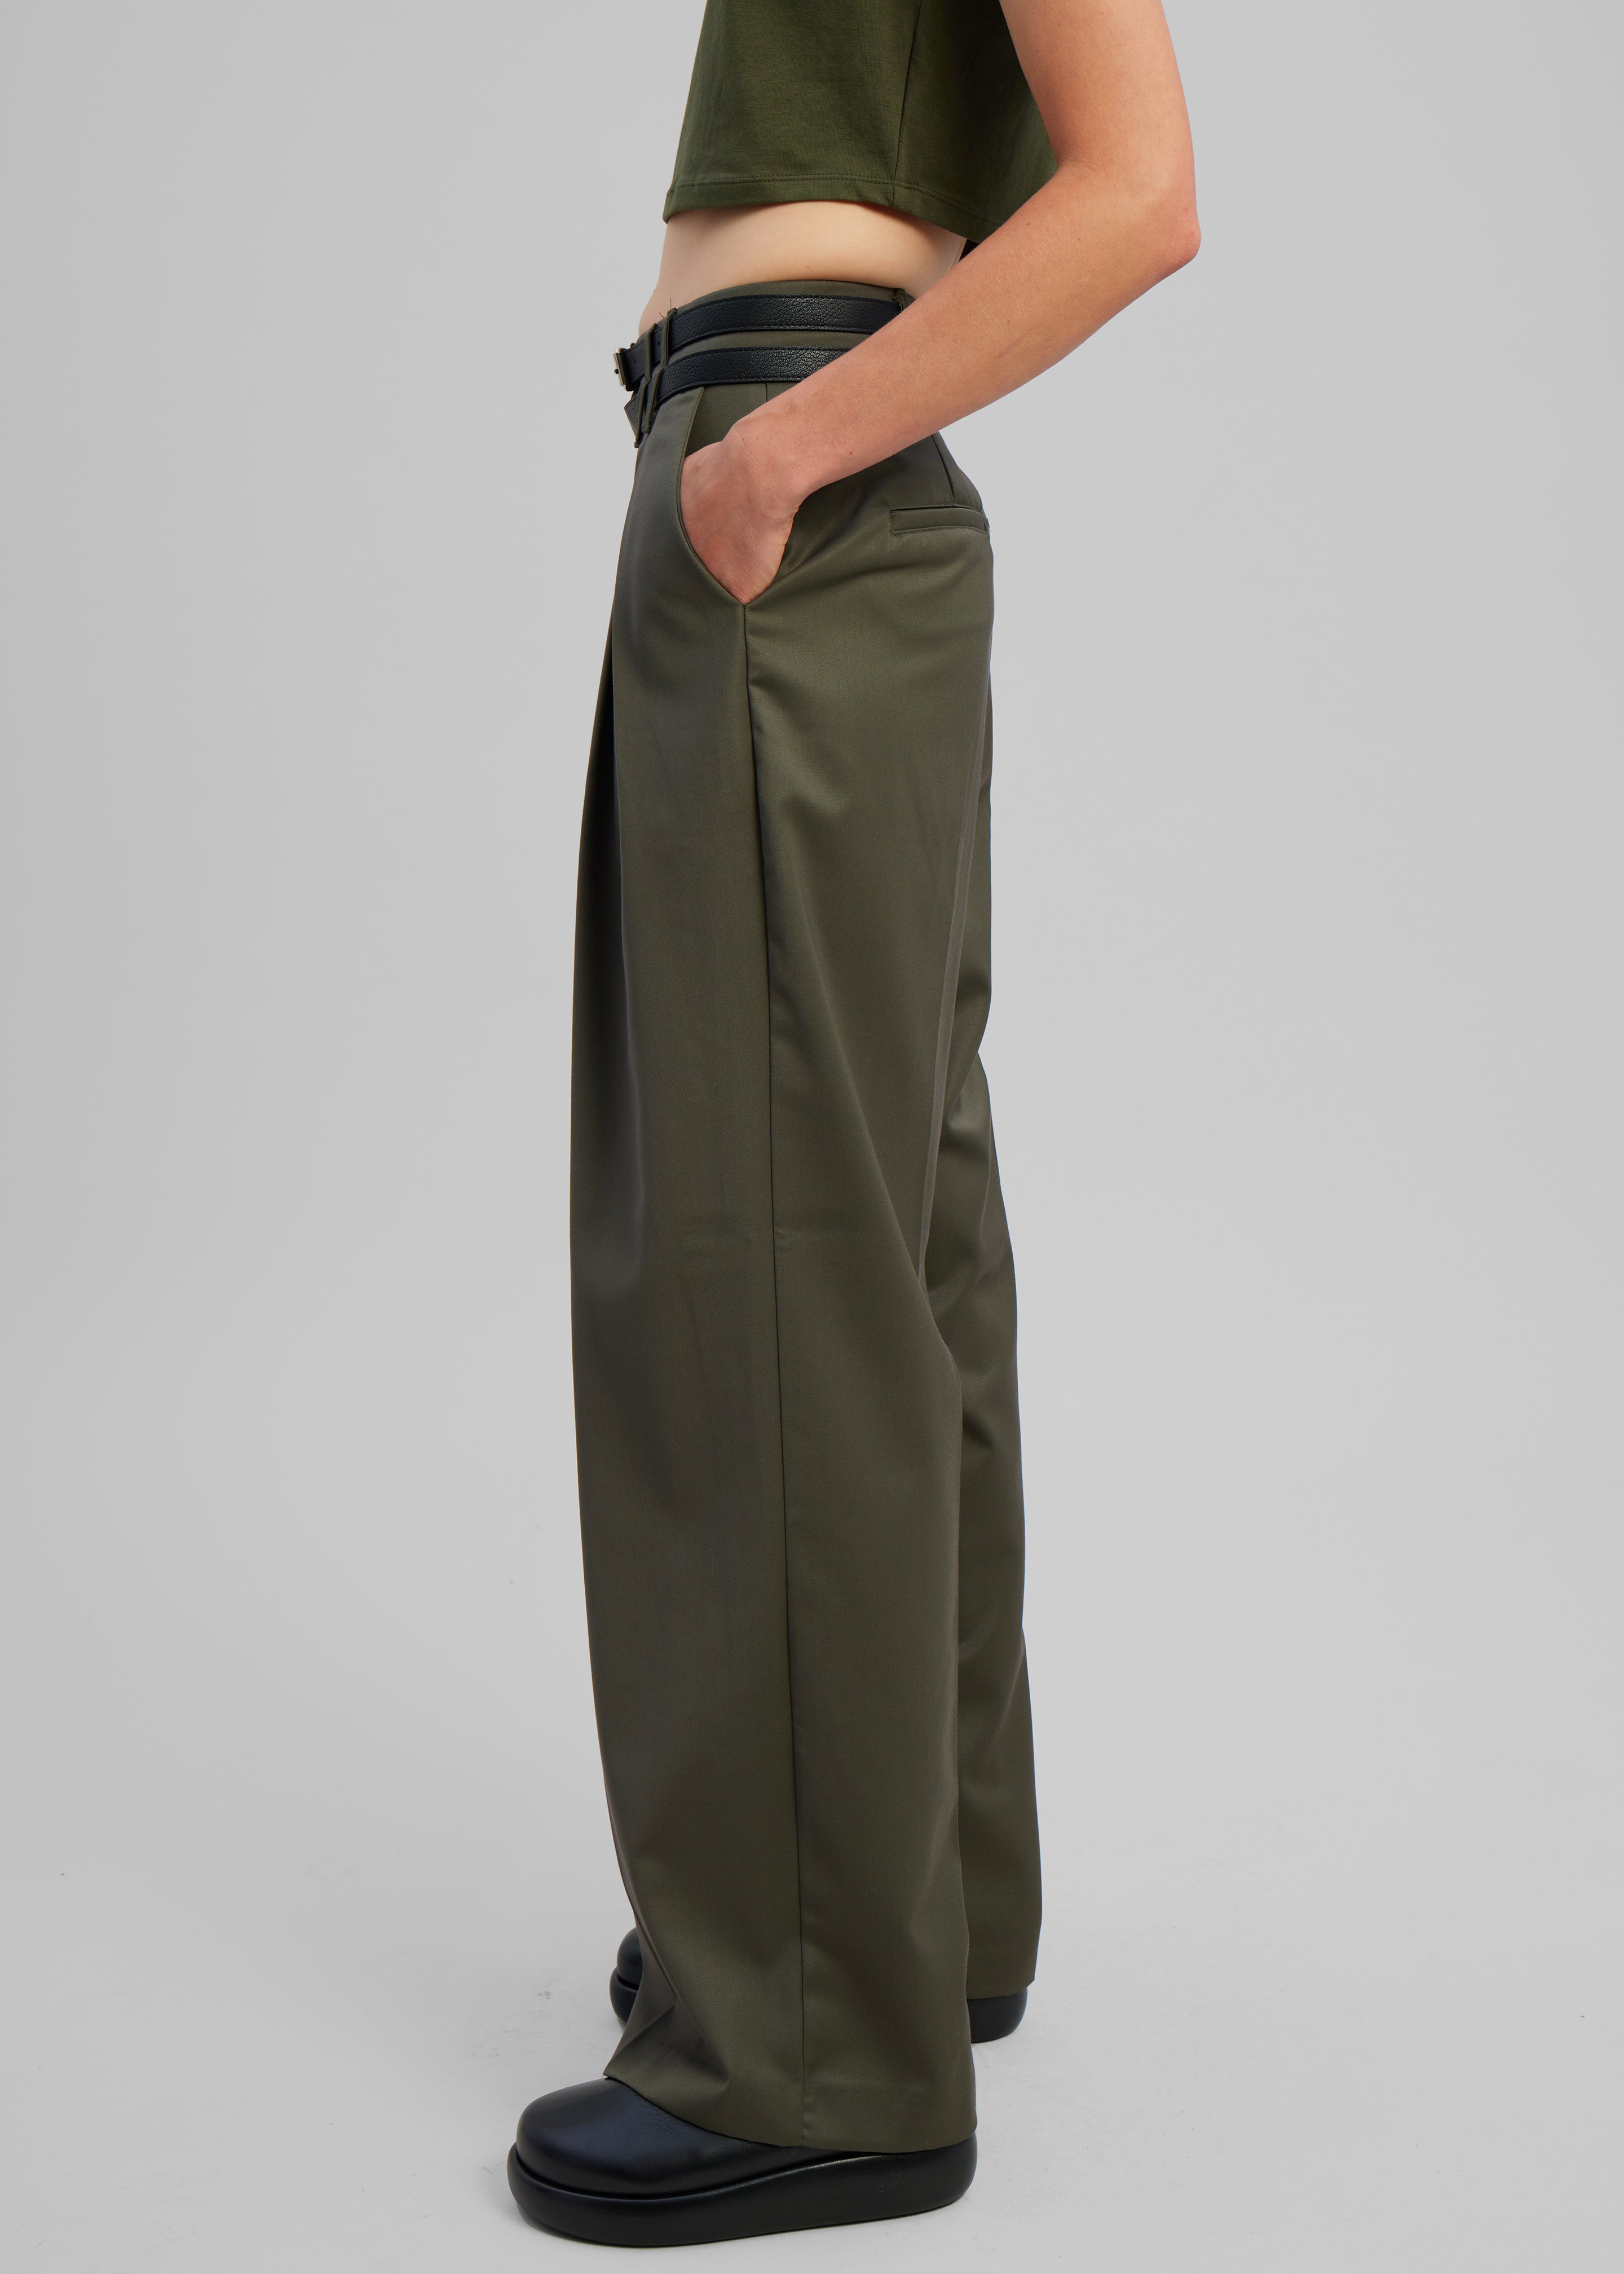 Nellie Belted Pleated Pants - Olive - 5